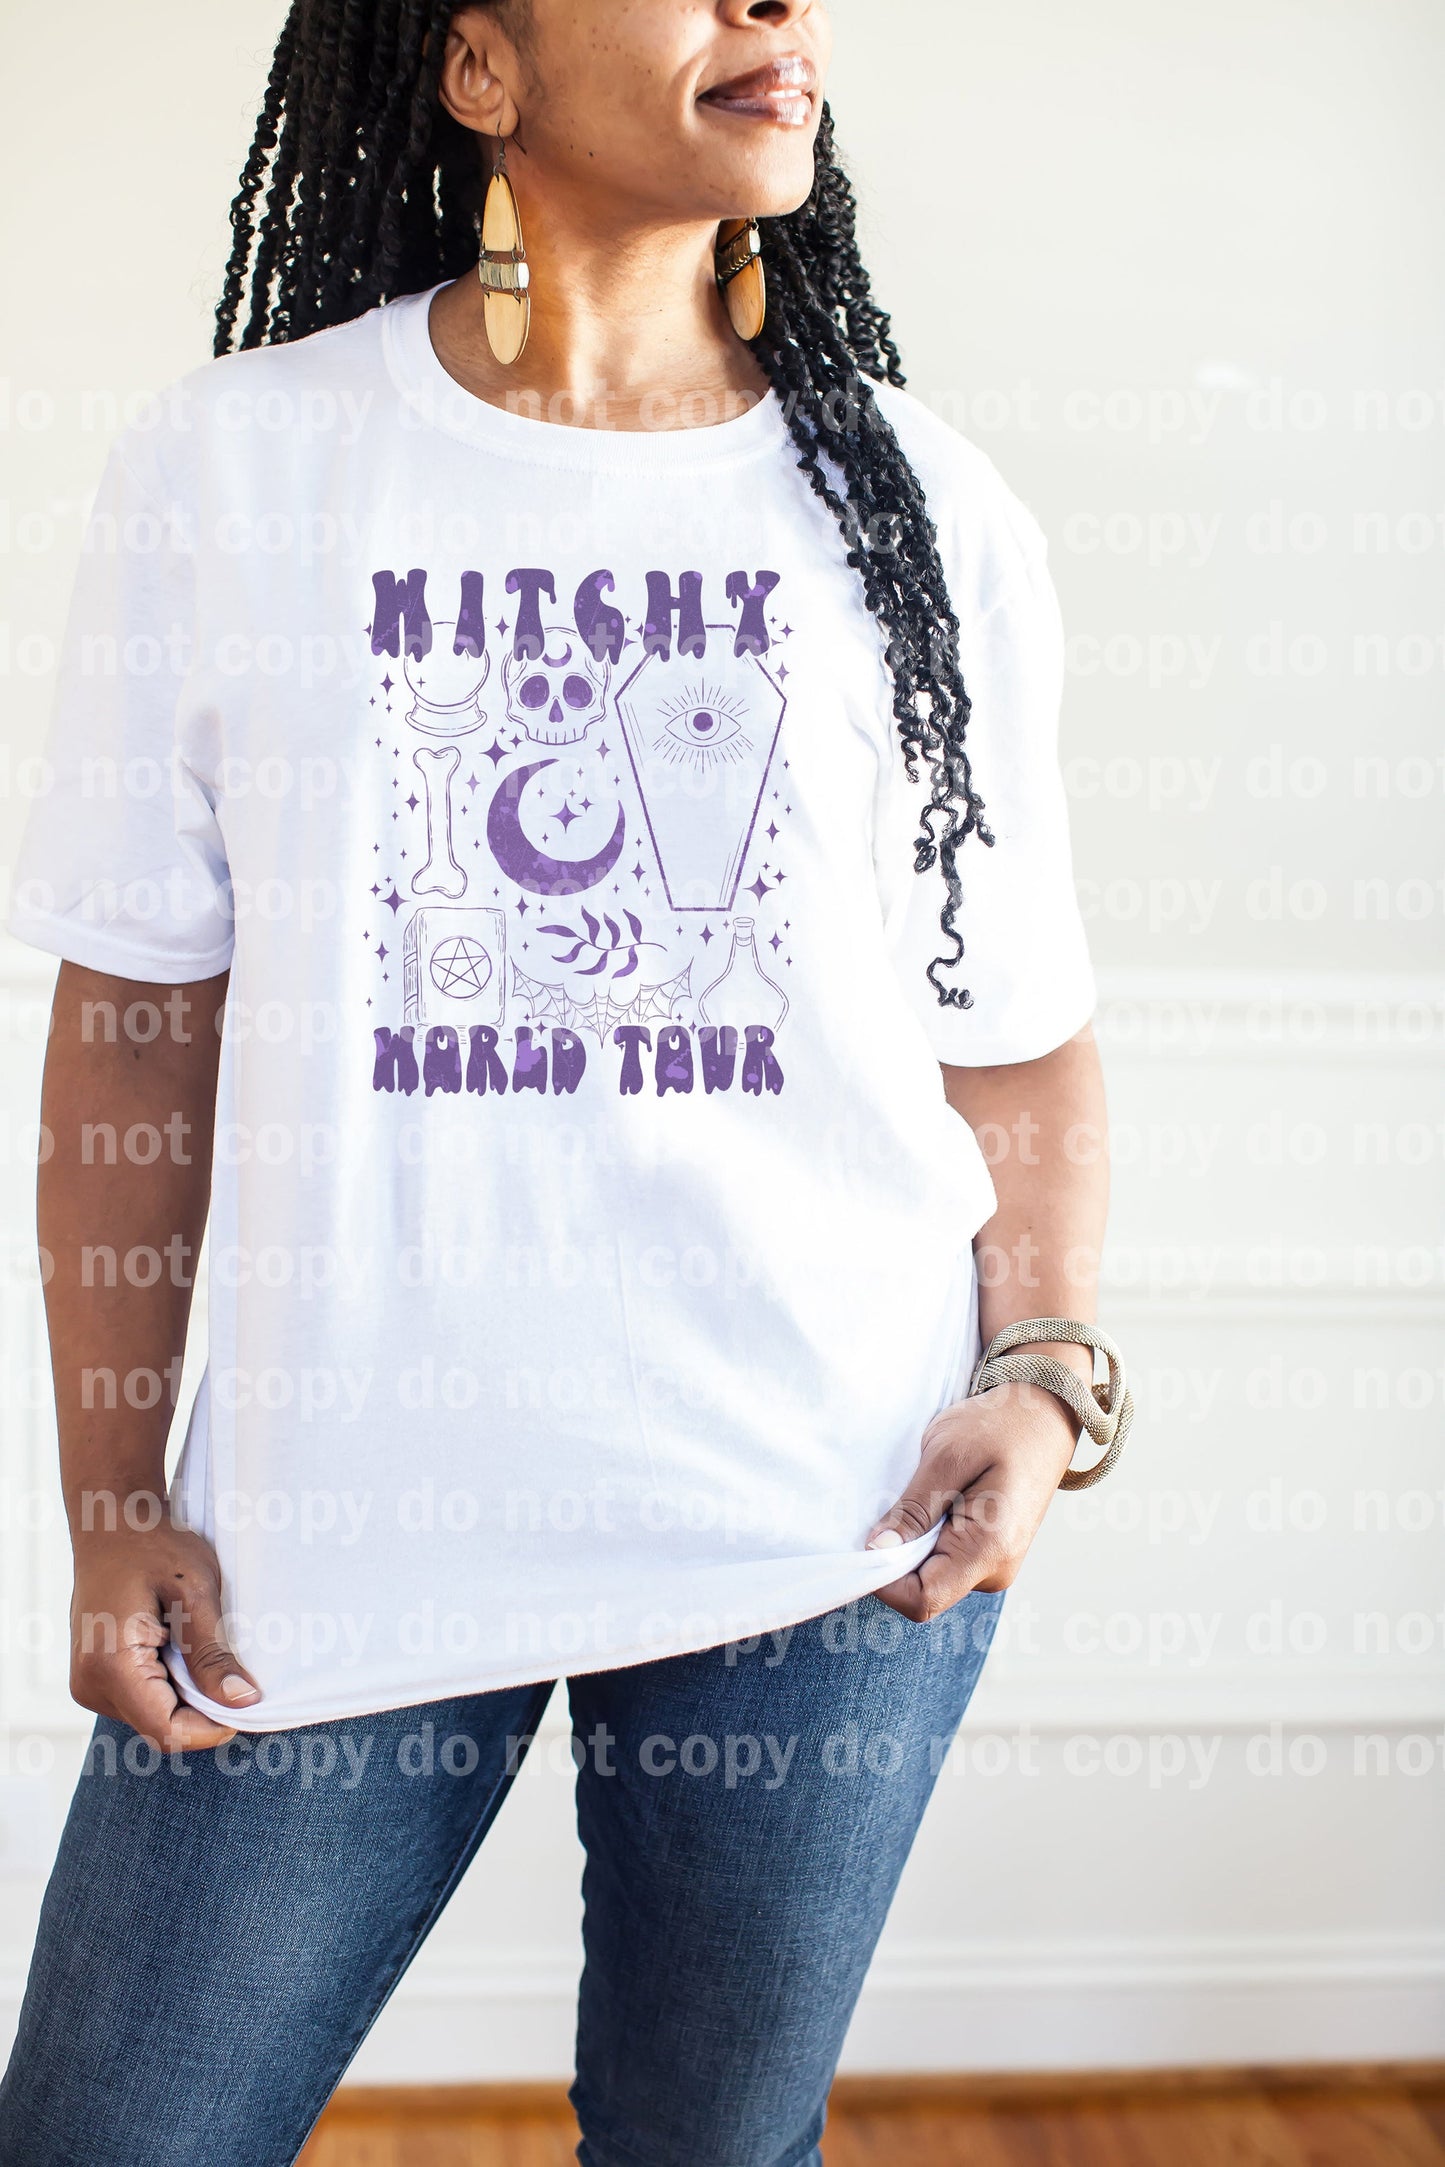 Witchy World Tour Dream Print or Sublimation Print